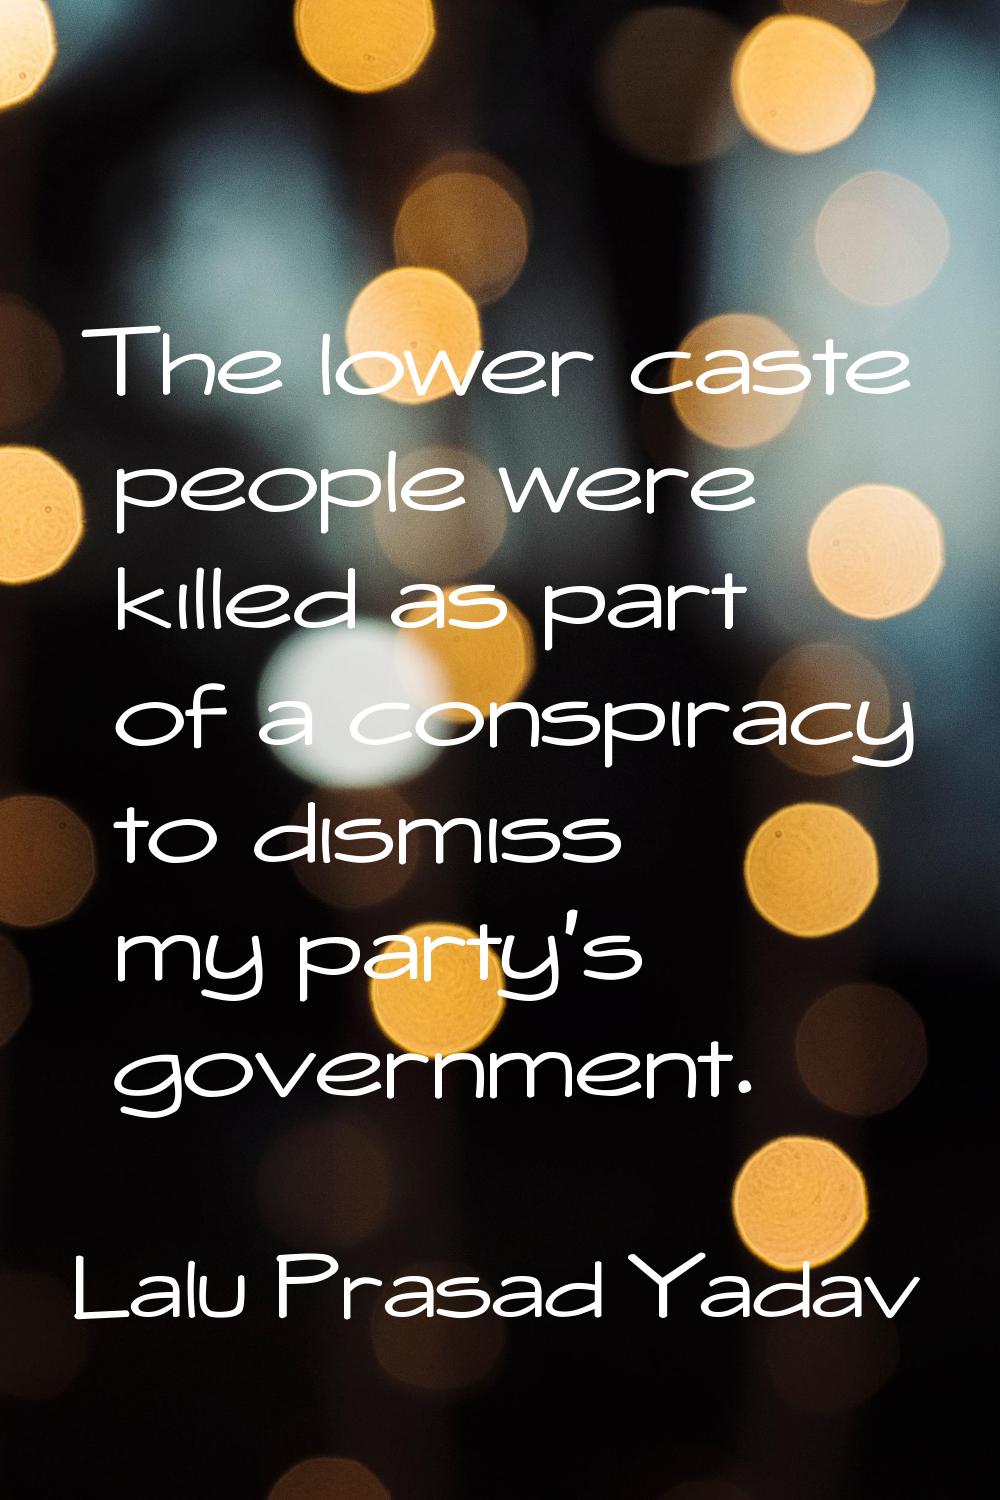 The lower caste people were killed as part of a conspiracy to dismiss my party's government.